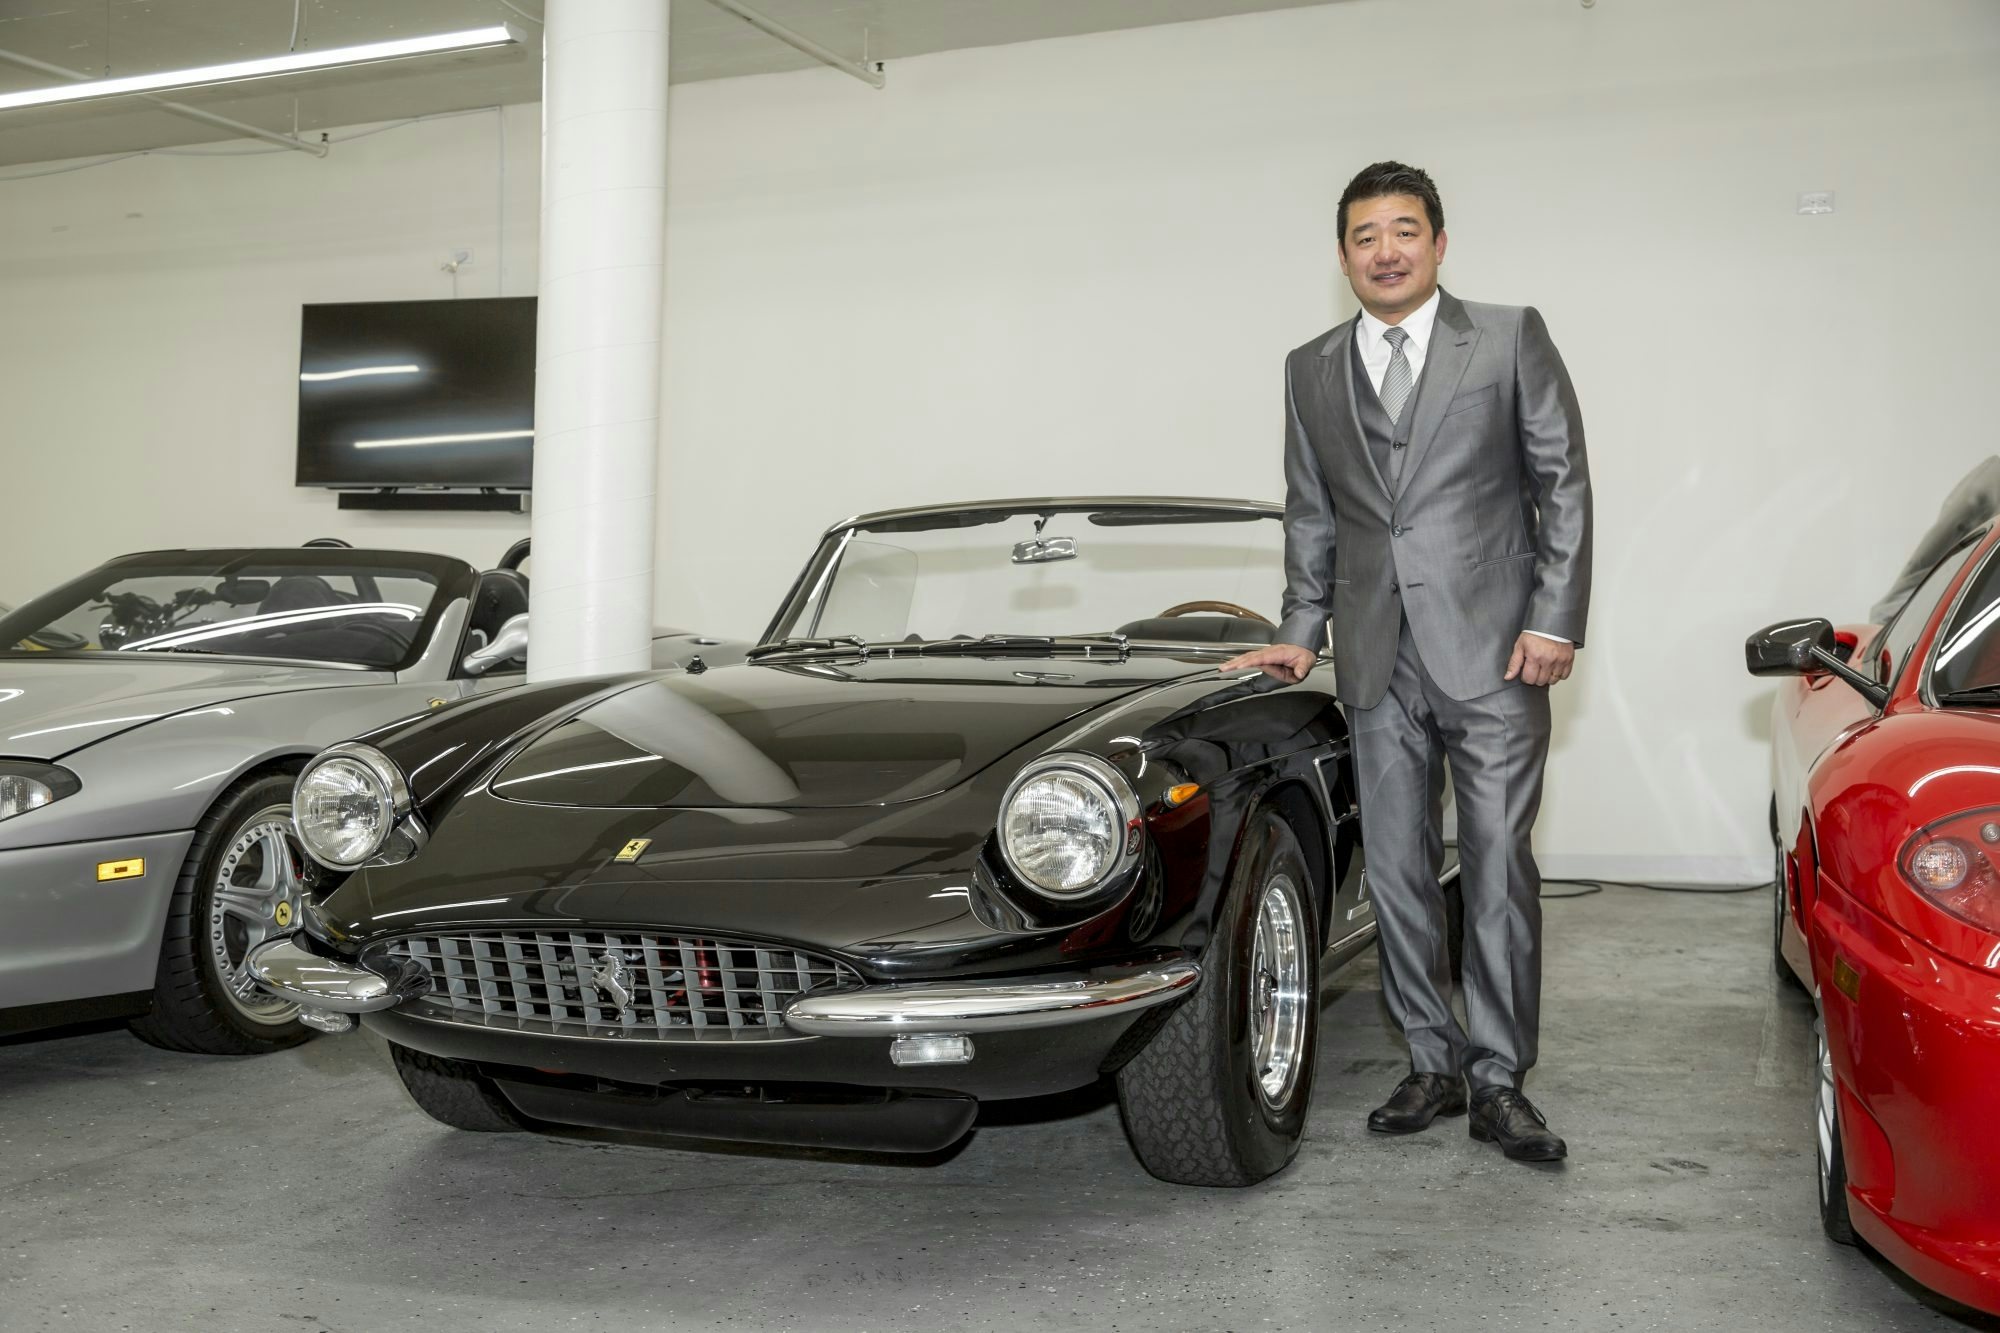 Hing Wa Lee CEO David Lee's hobbies includes collecting cars, including this Ferrari. (Courtesy of Ted7)